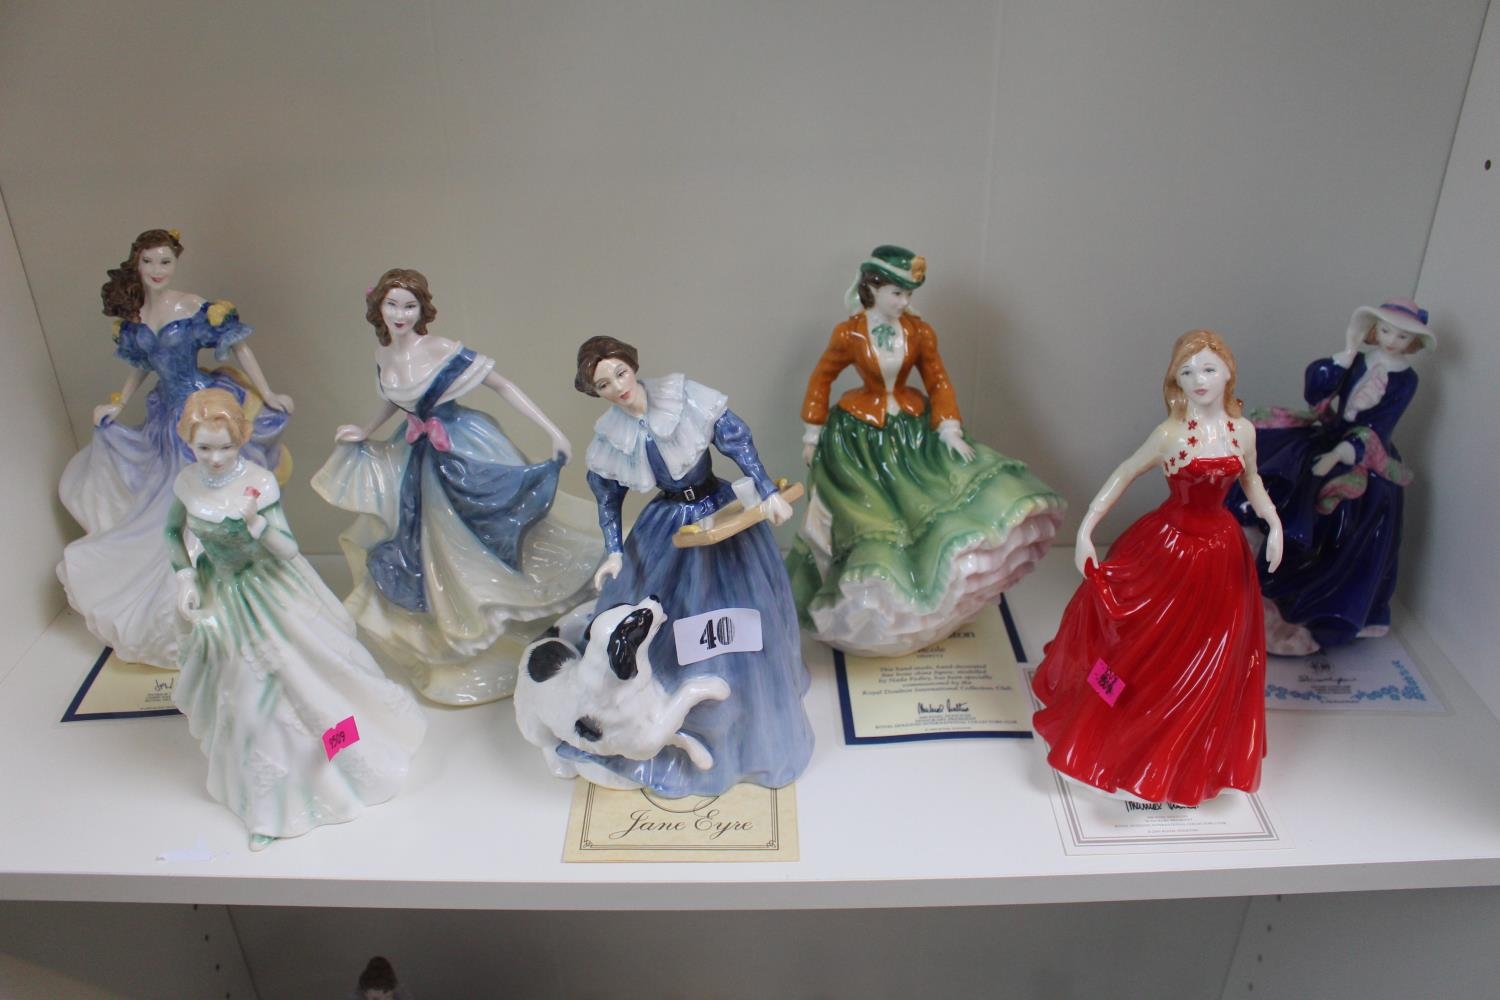 Collection of 7 Royal Doulton figurines including Grace, Jane Eyre etc